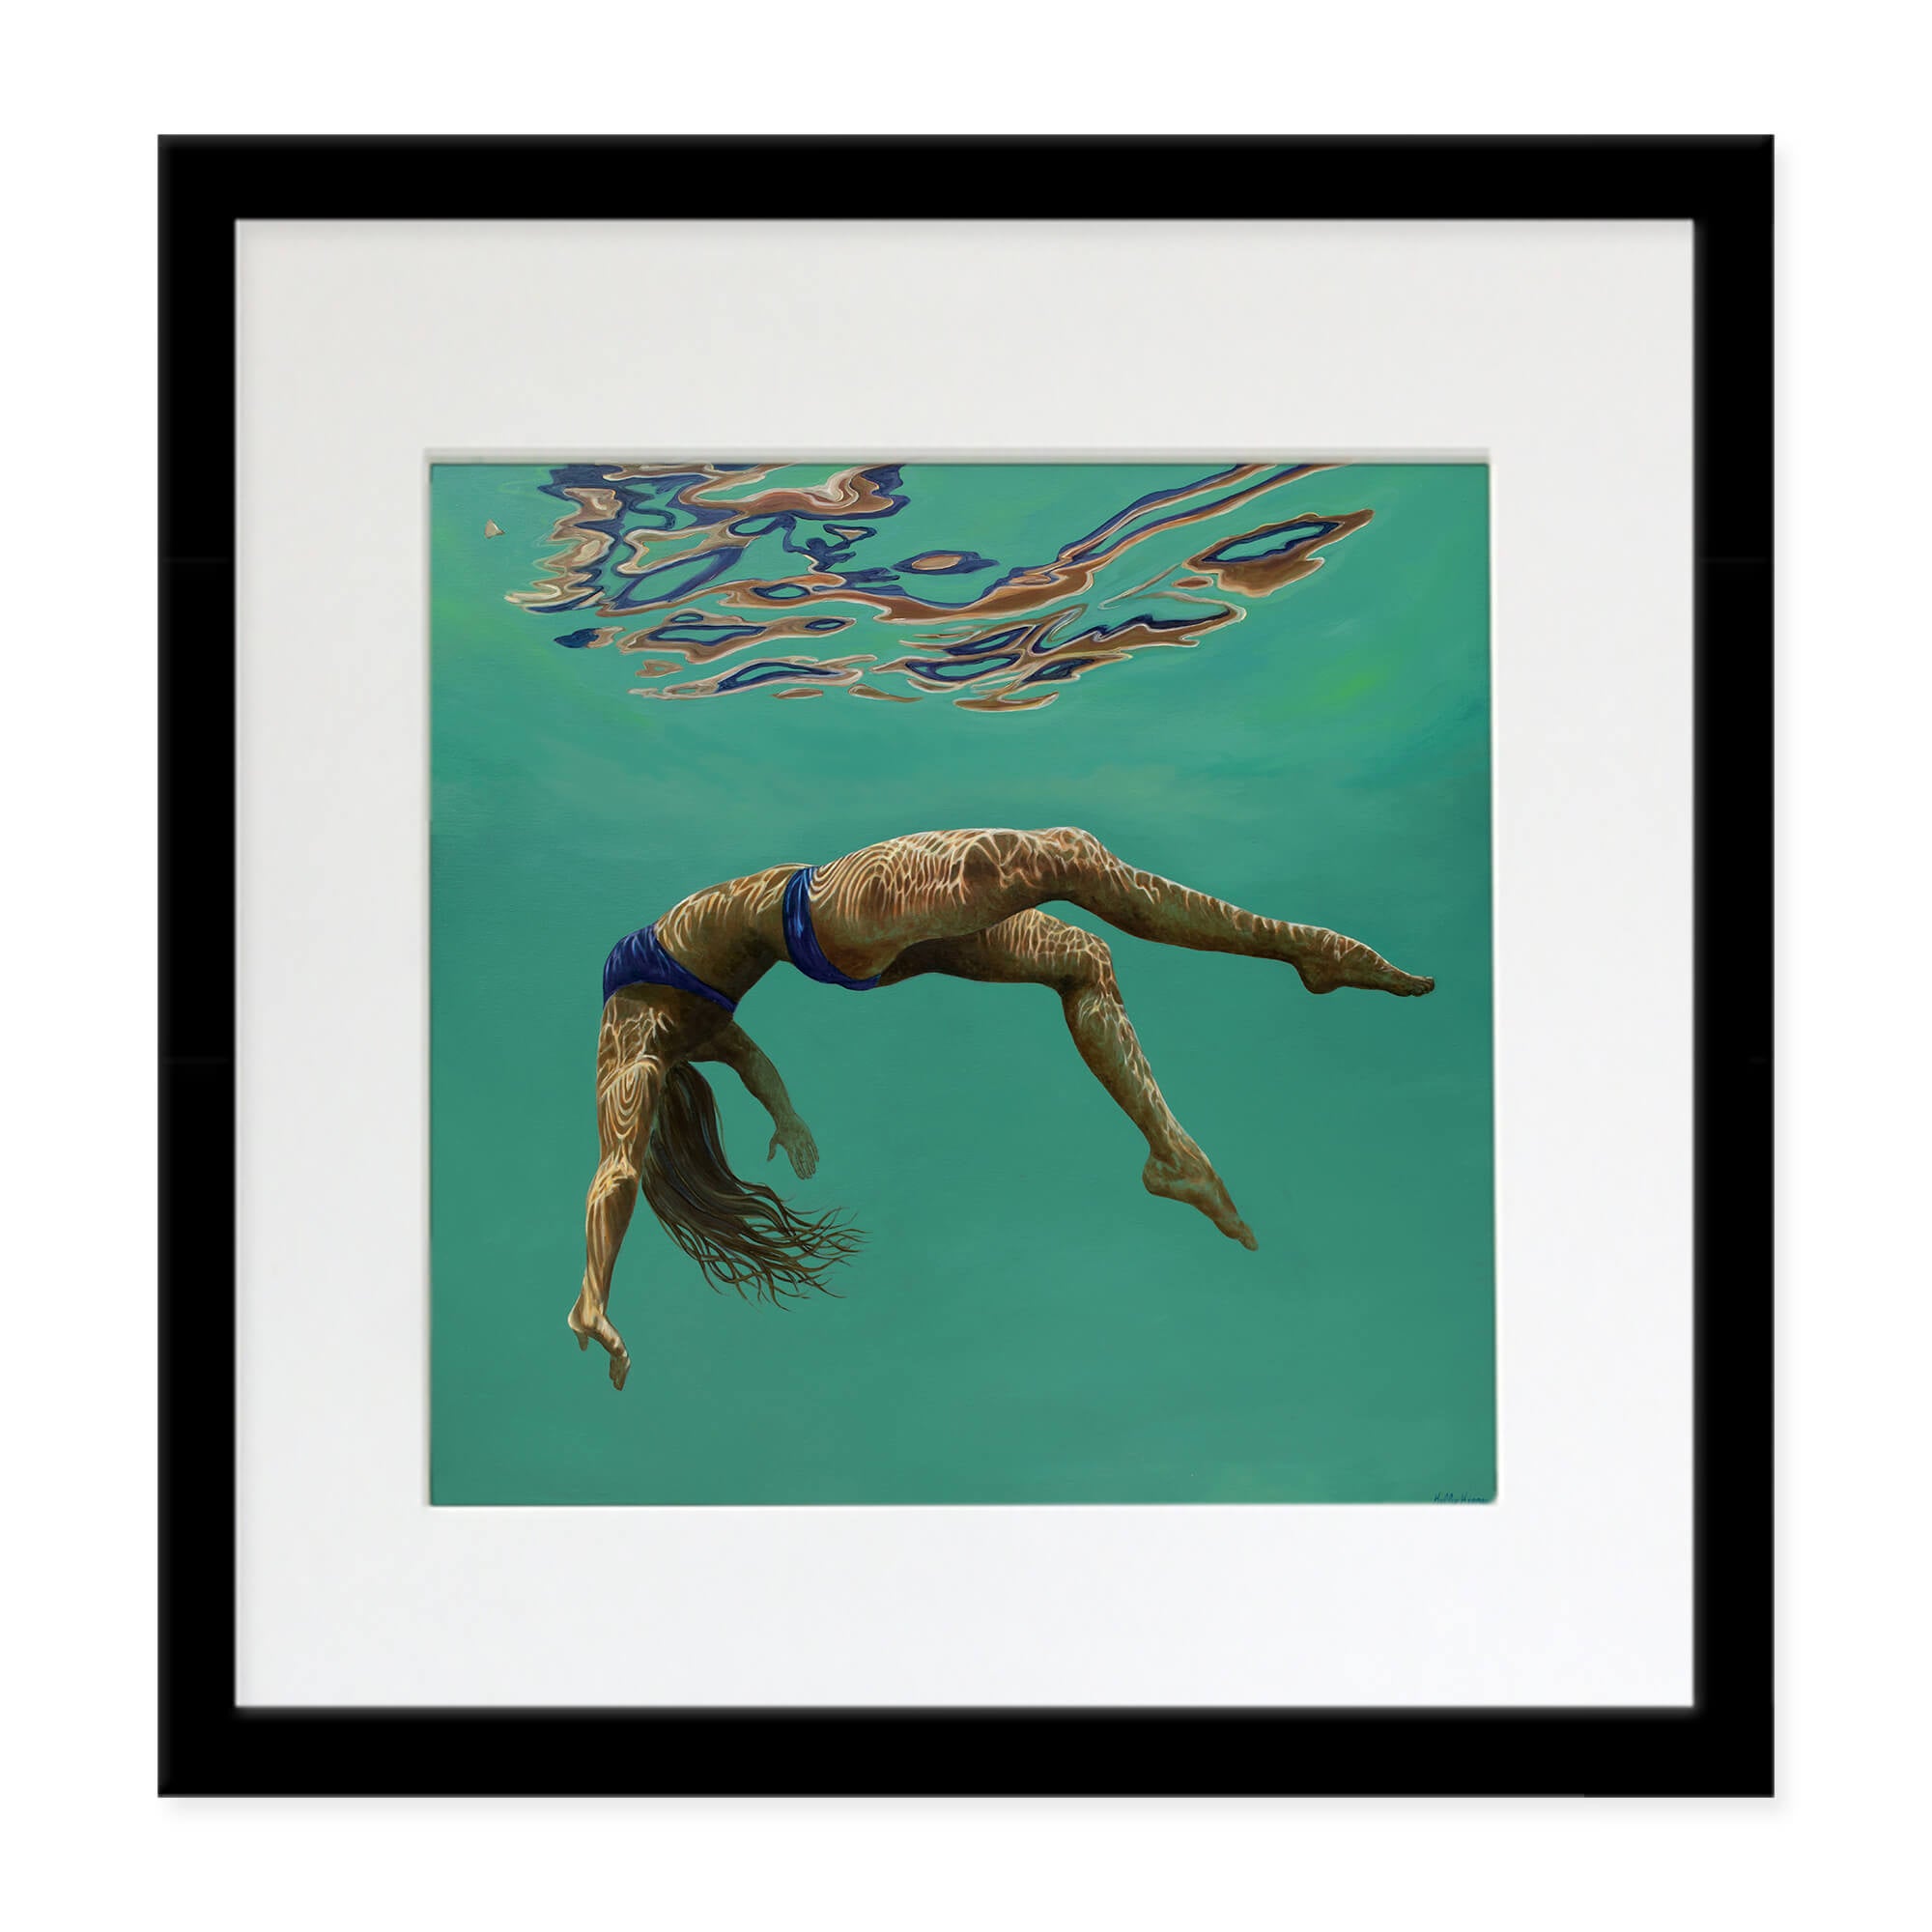 Matted art print of a woman having a peaceful moment underwater by Hawaii artist Kelly Keane